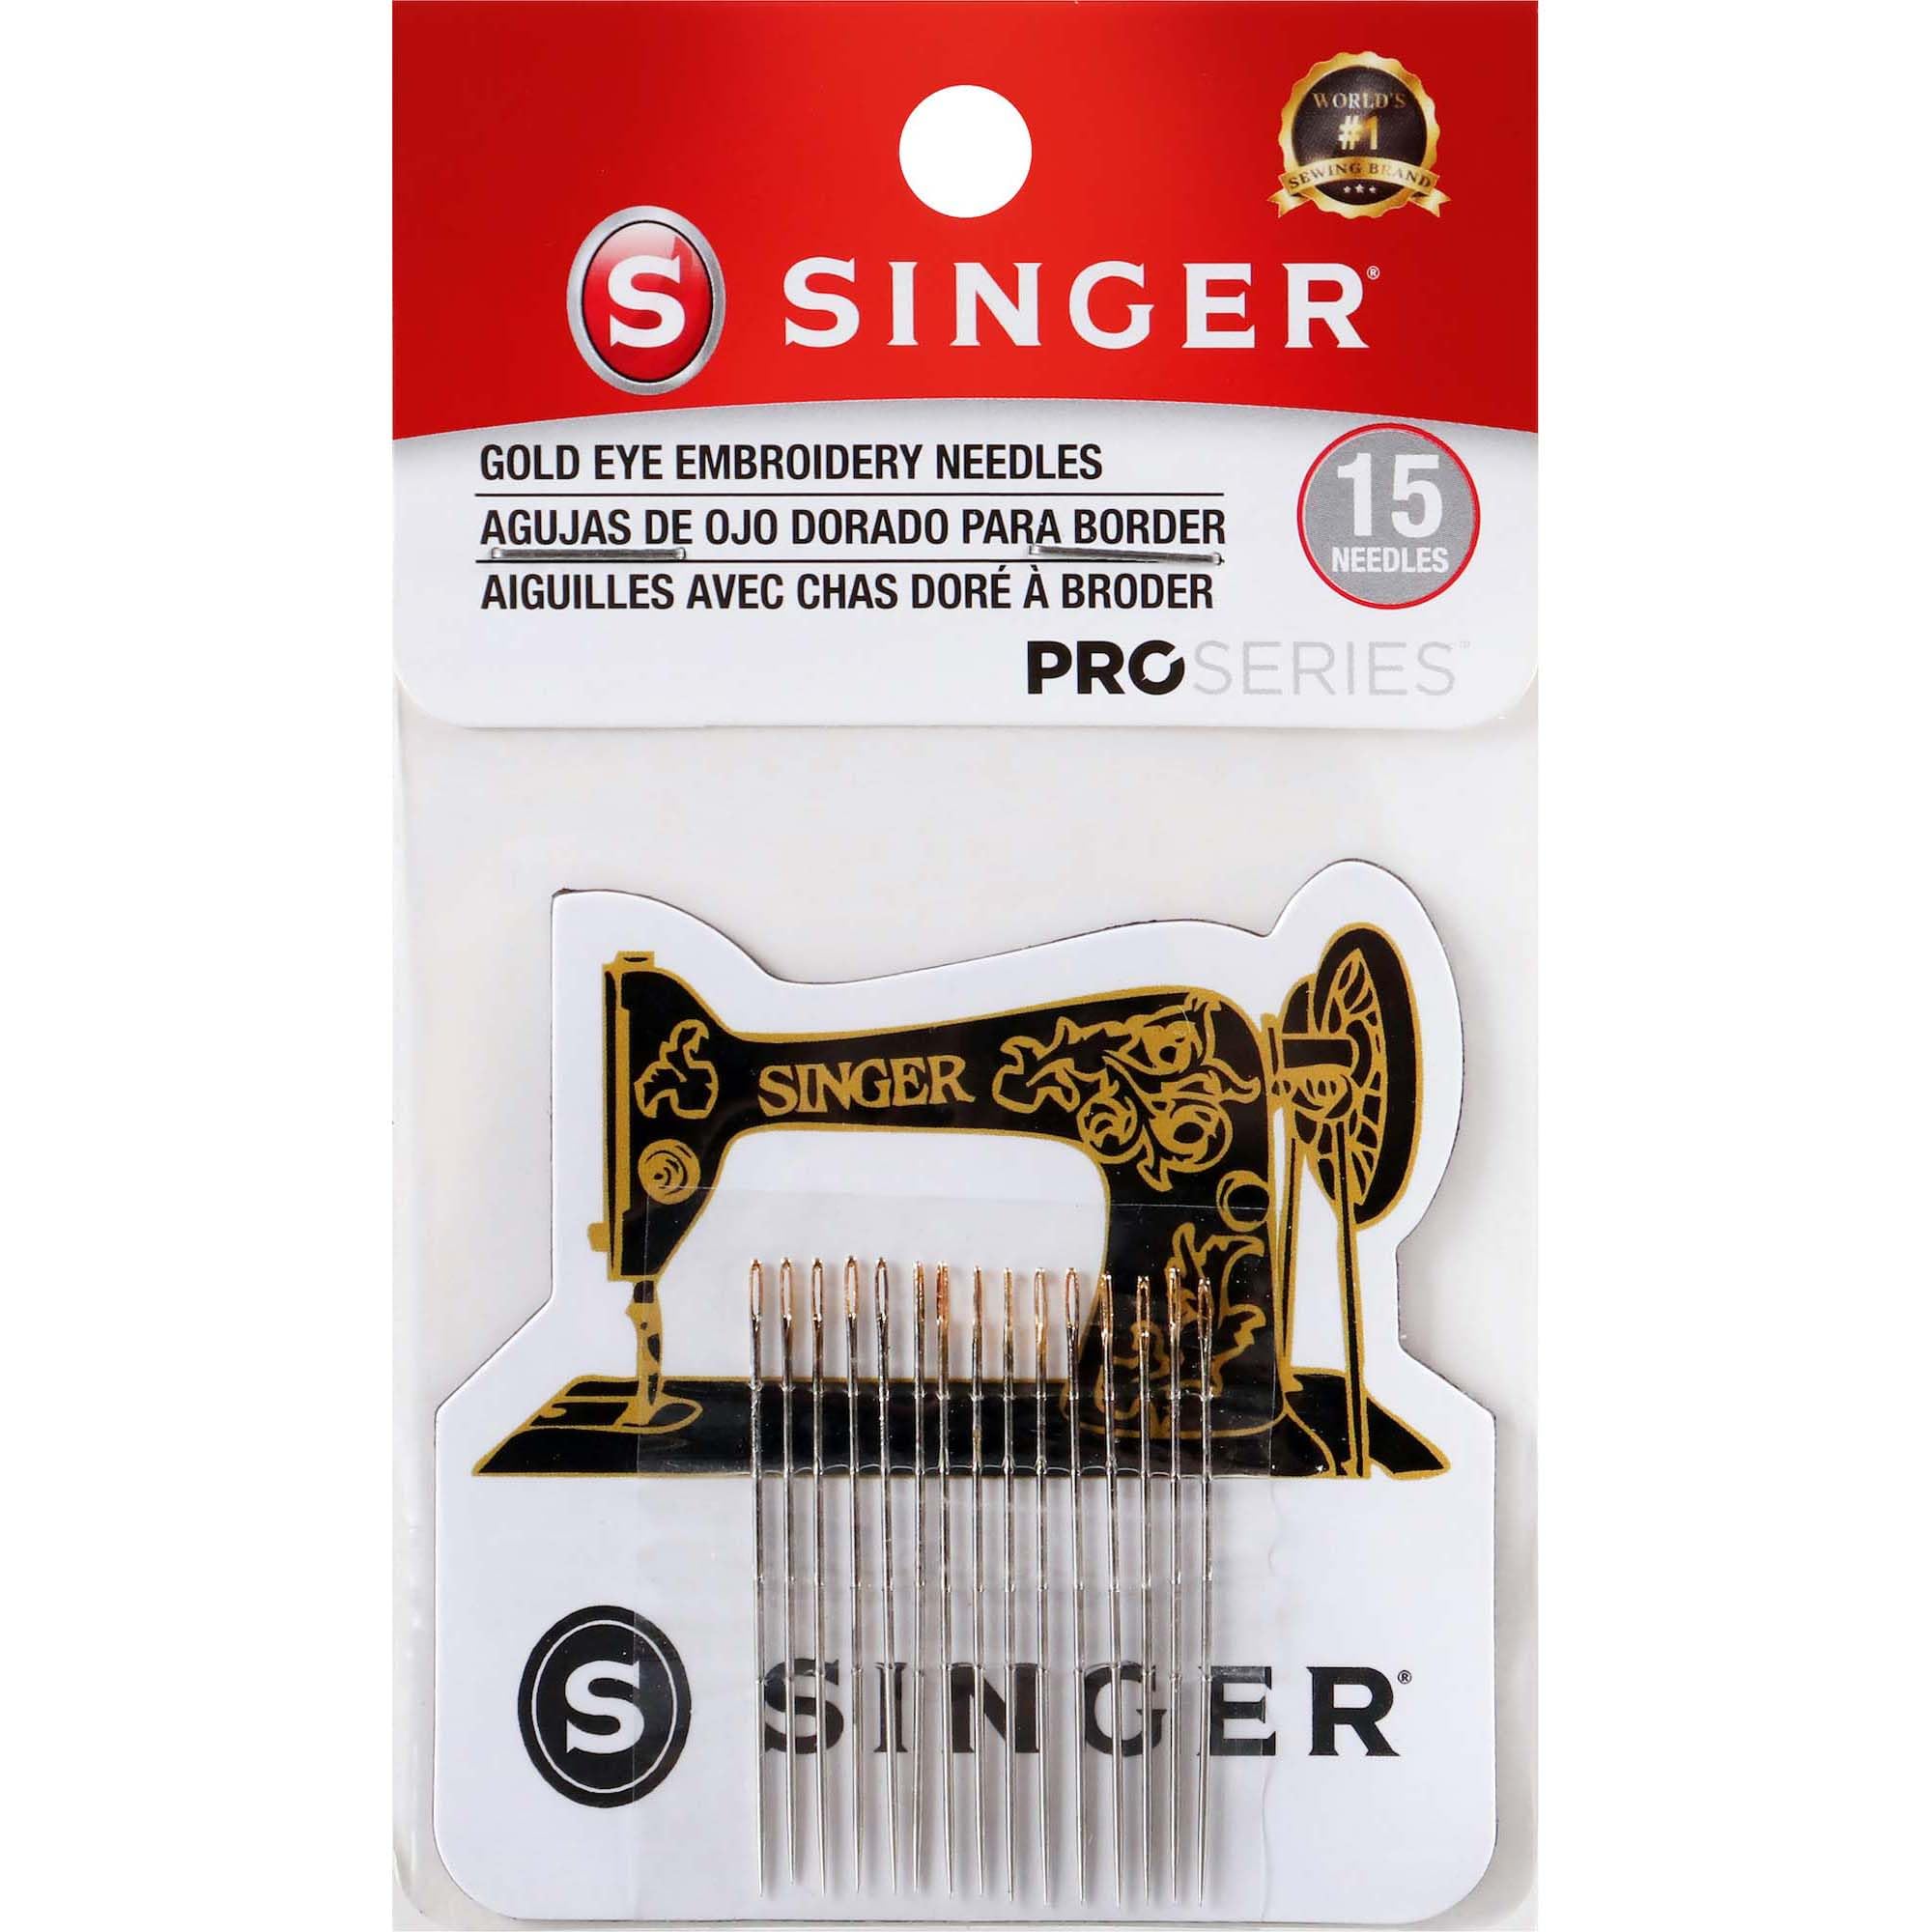 SINGER 04325 ProSeries Quilter's Embroidery Needles with Magnet, 15-Count